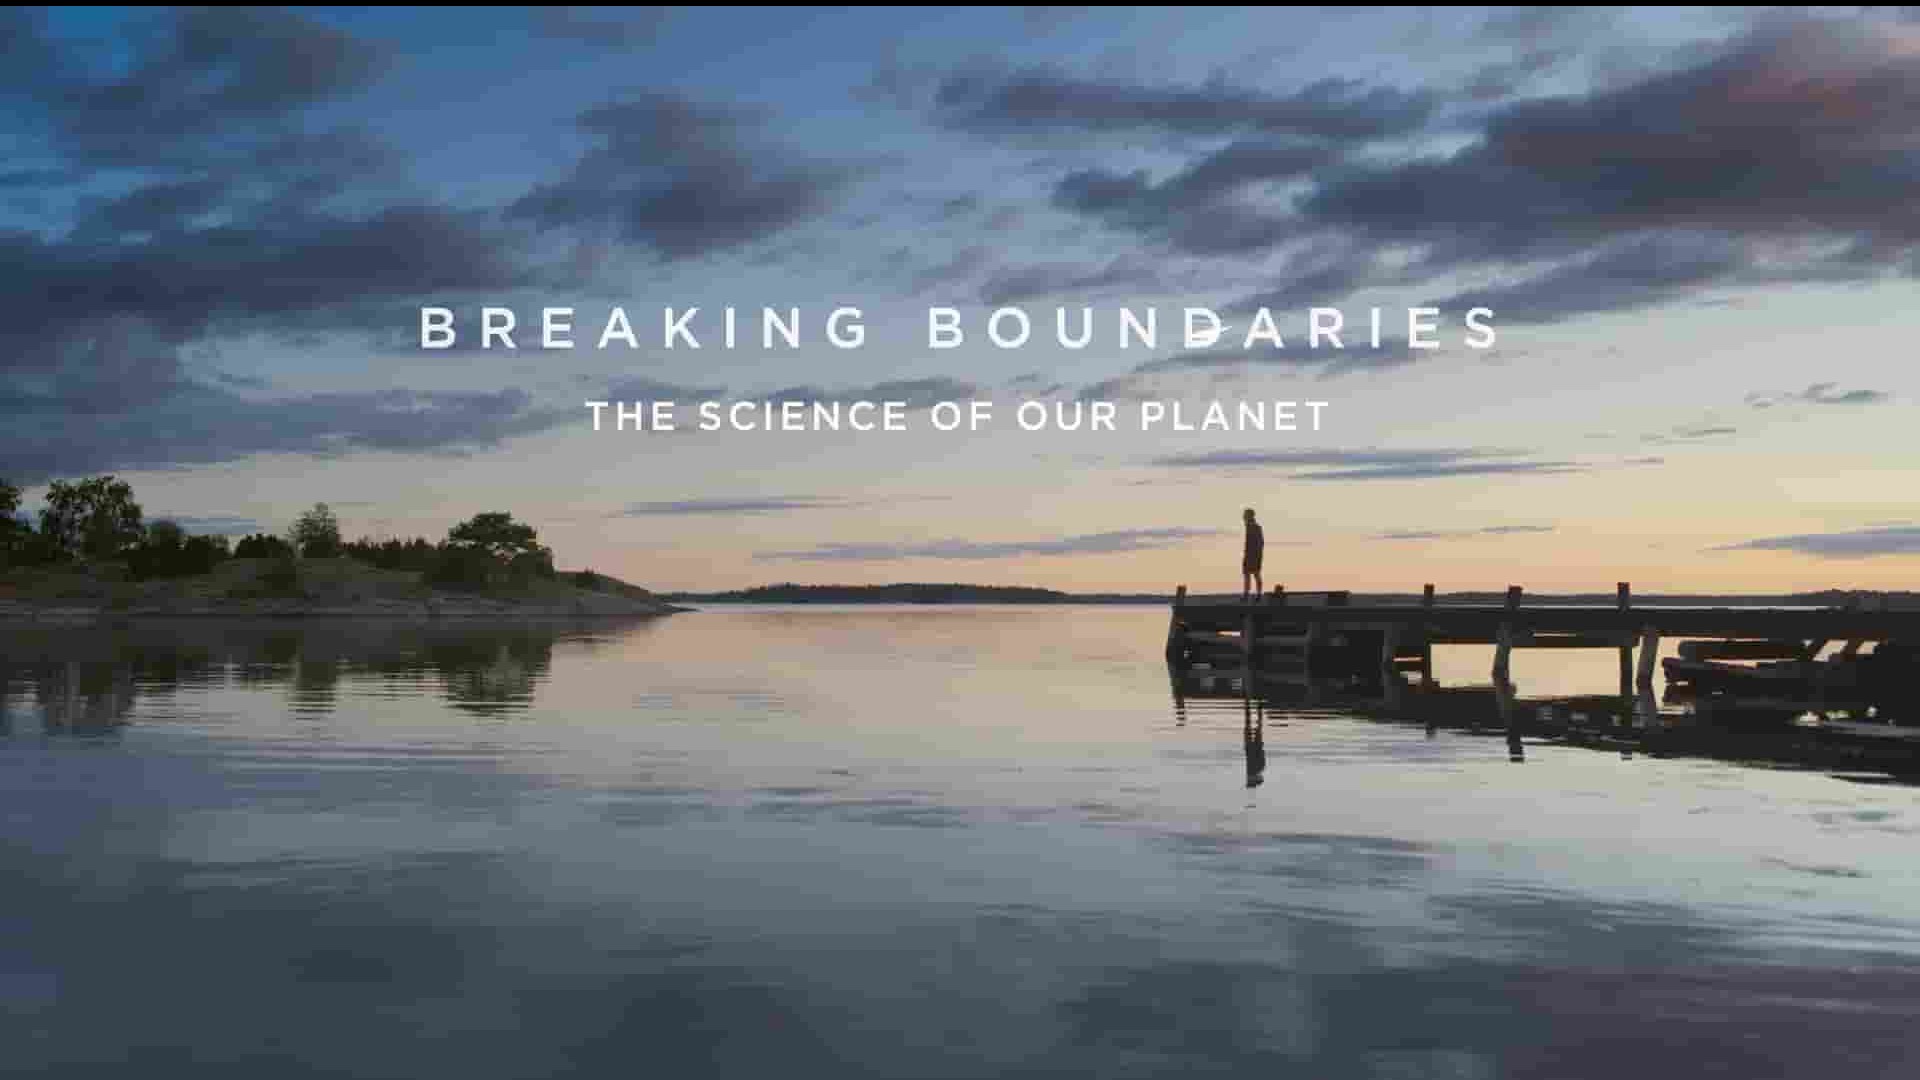 Netflix纪录片《打破边界：我们星球的科学 Breaking Boundaries: The Science of Our Planet 2021》全1集 英语中字 1080P高清网盘下载